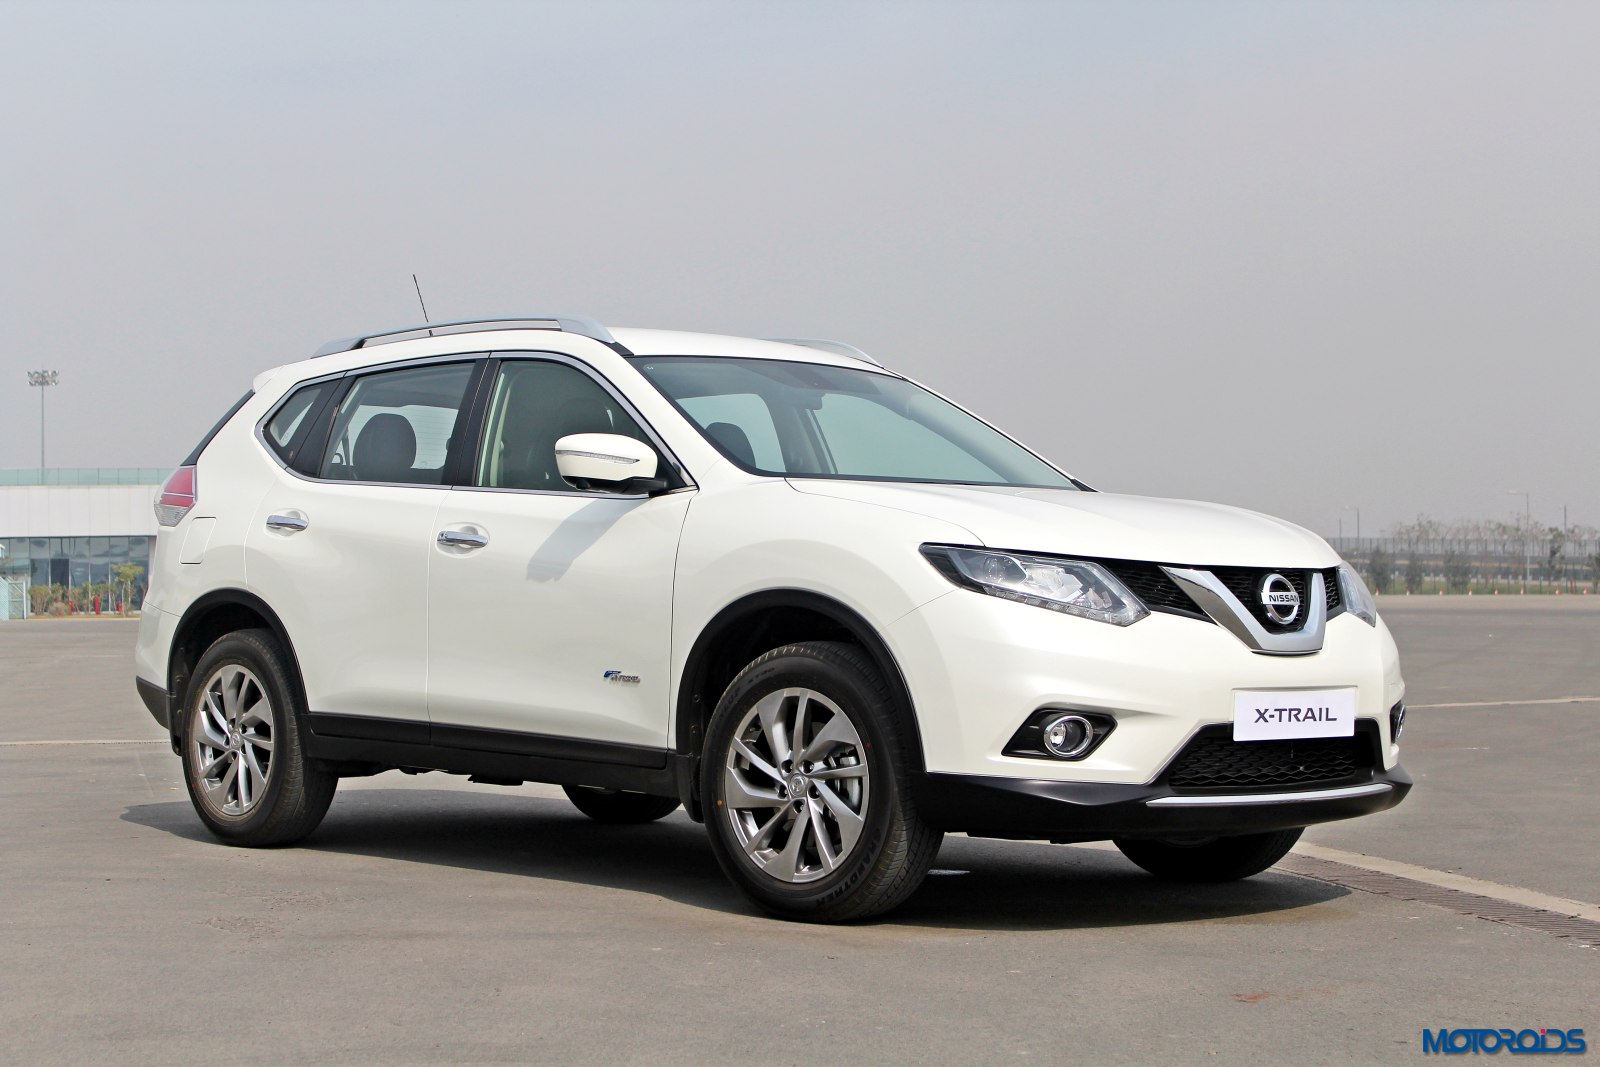 New 2016 Nissan X Trail Hybrid India Review Lean Muscle Motoroids